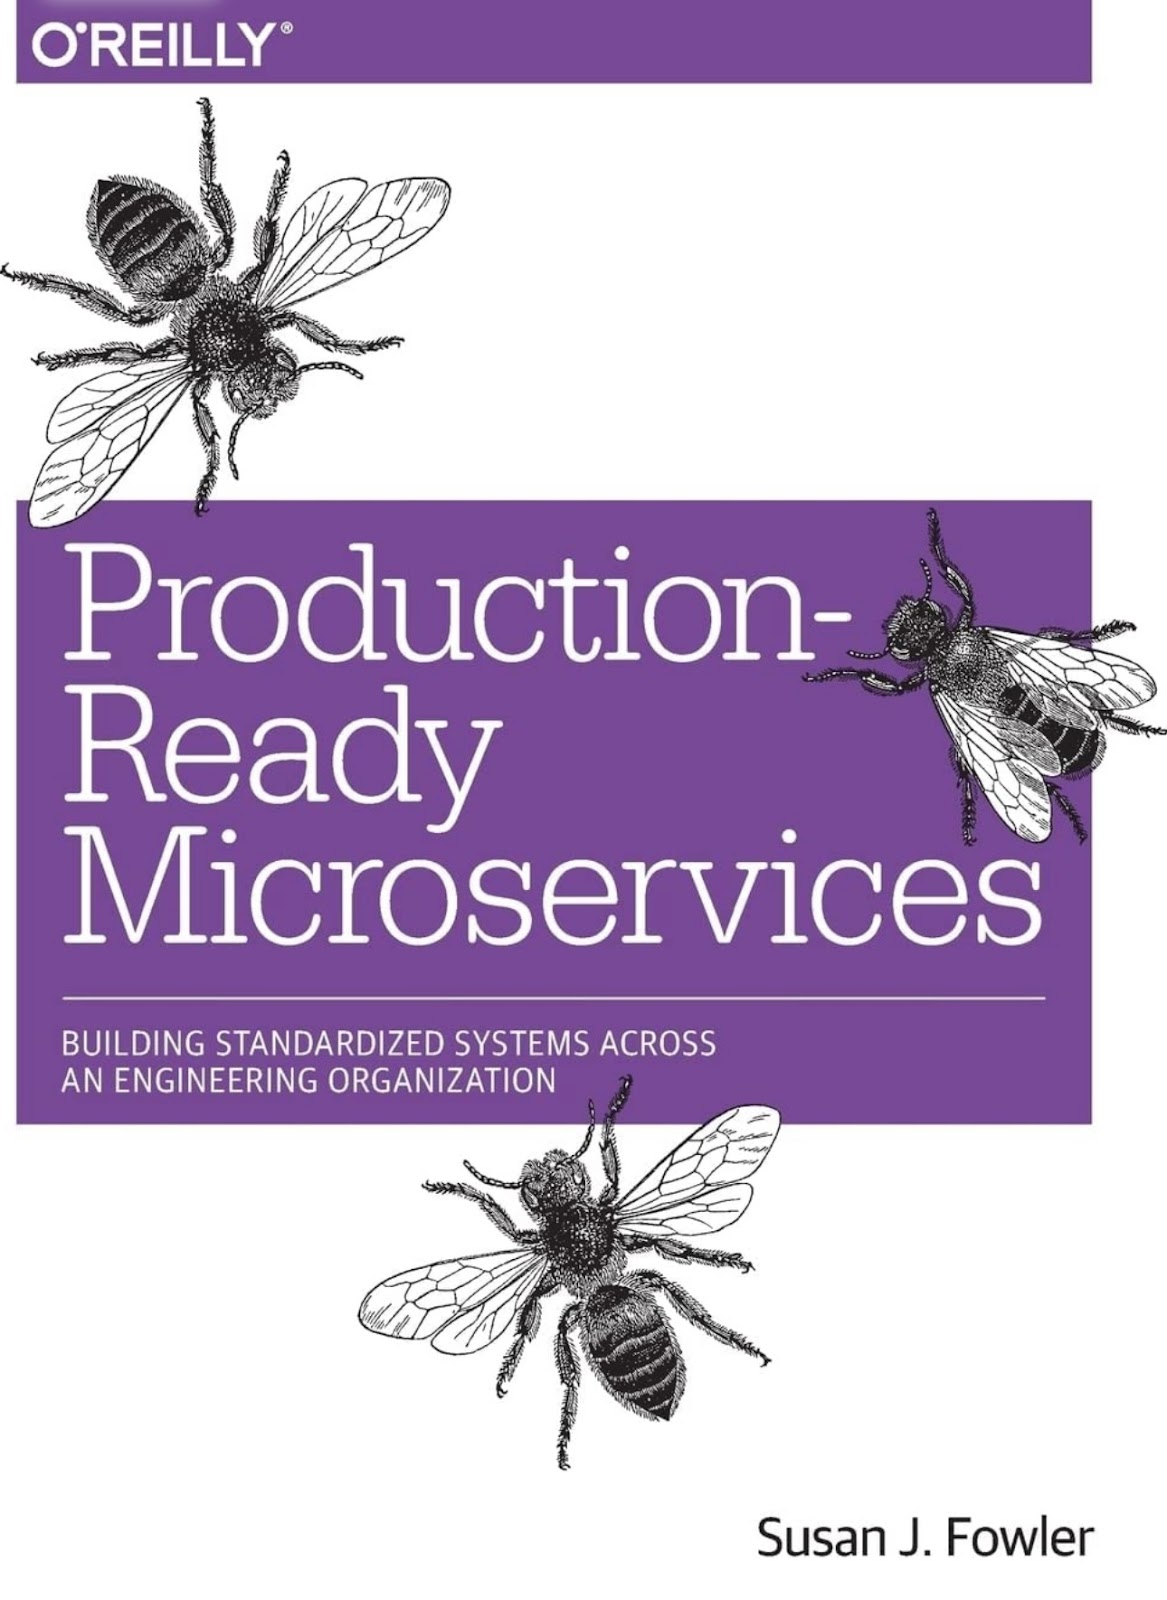 Production-Ready Microservices Book Cover